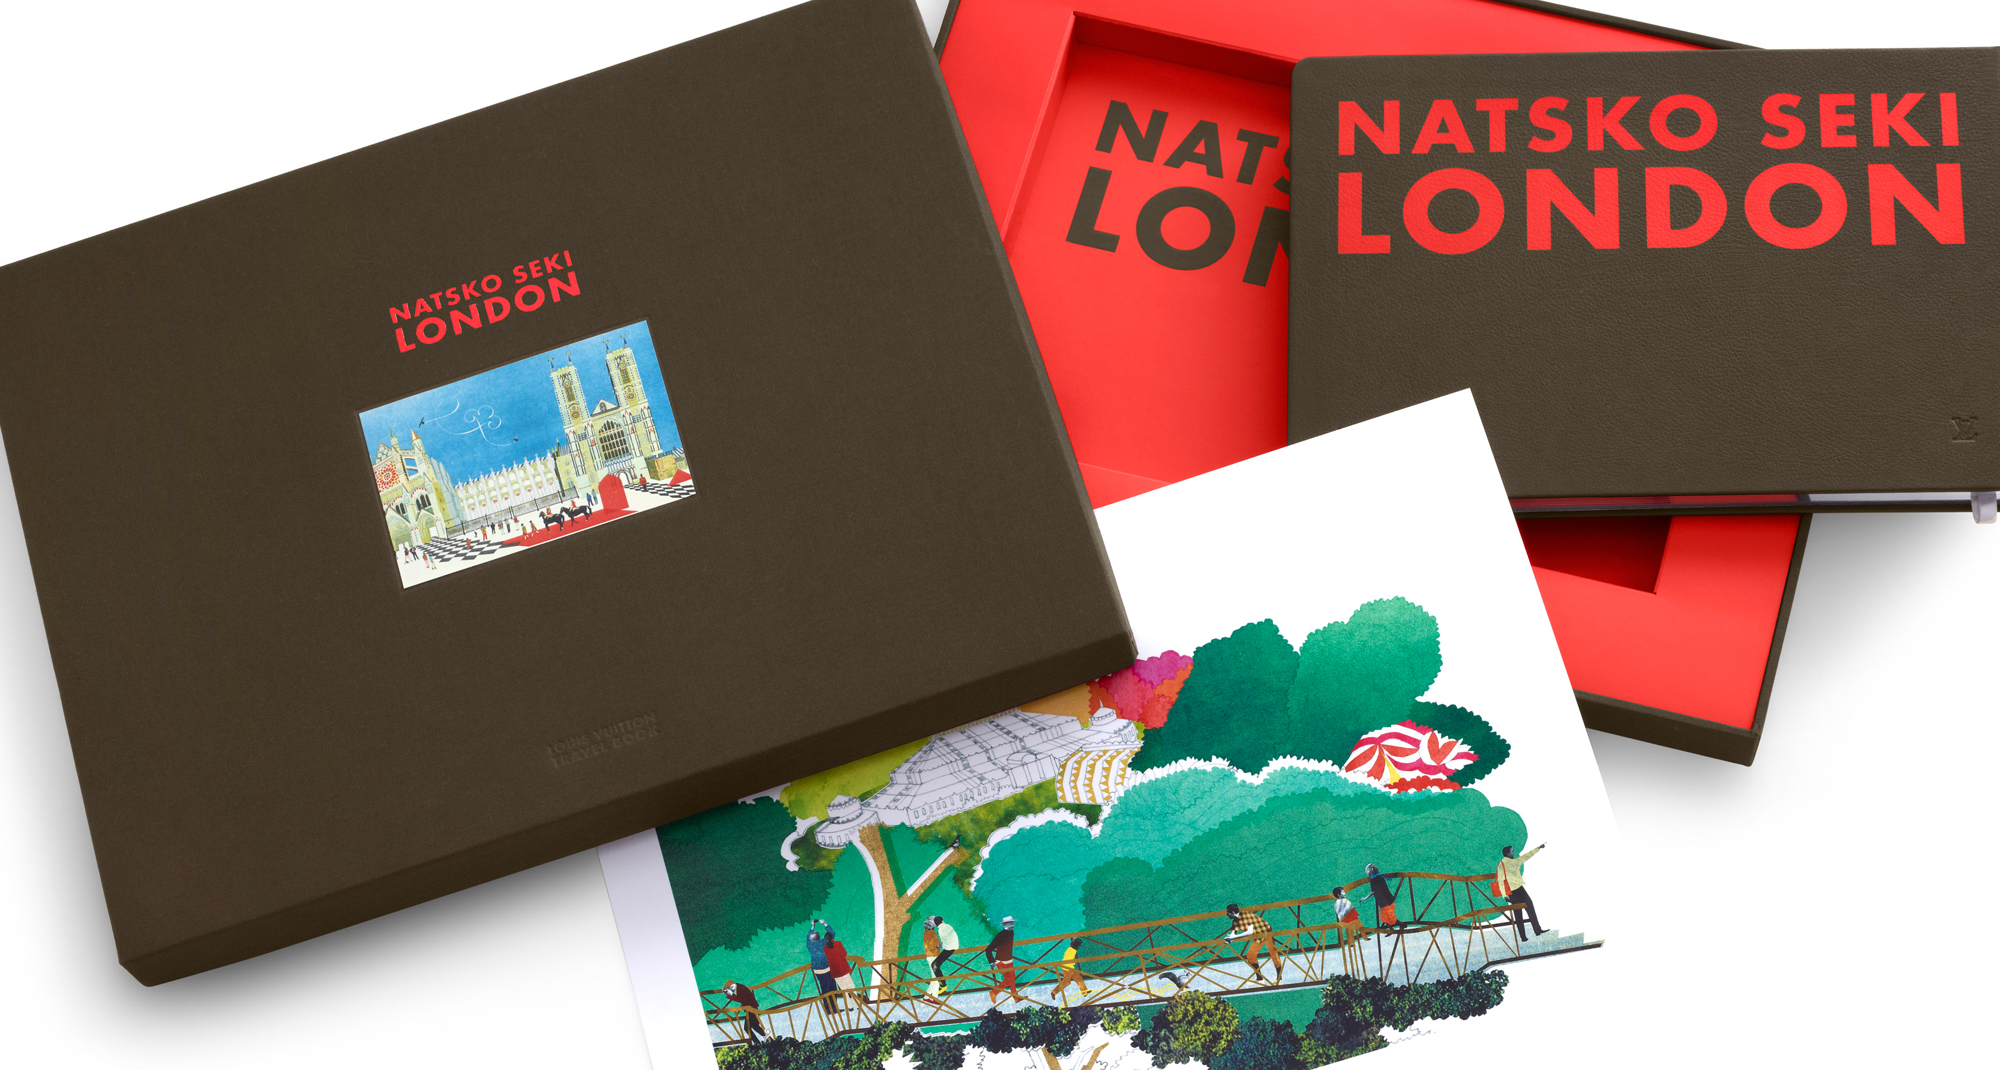 2013 Louis Vuitton Travel Books launched